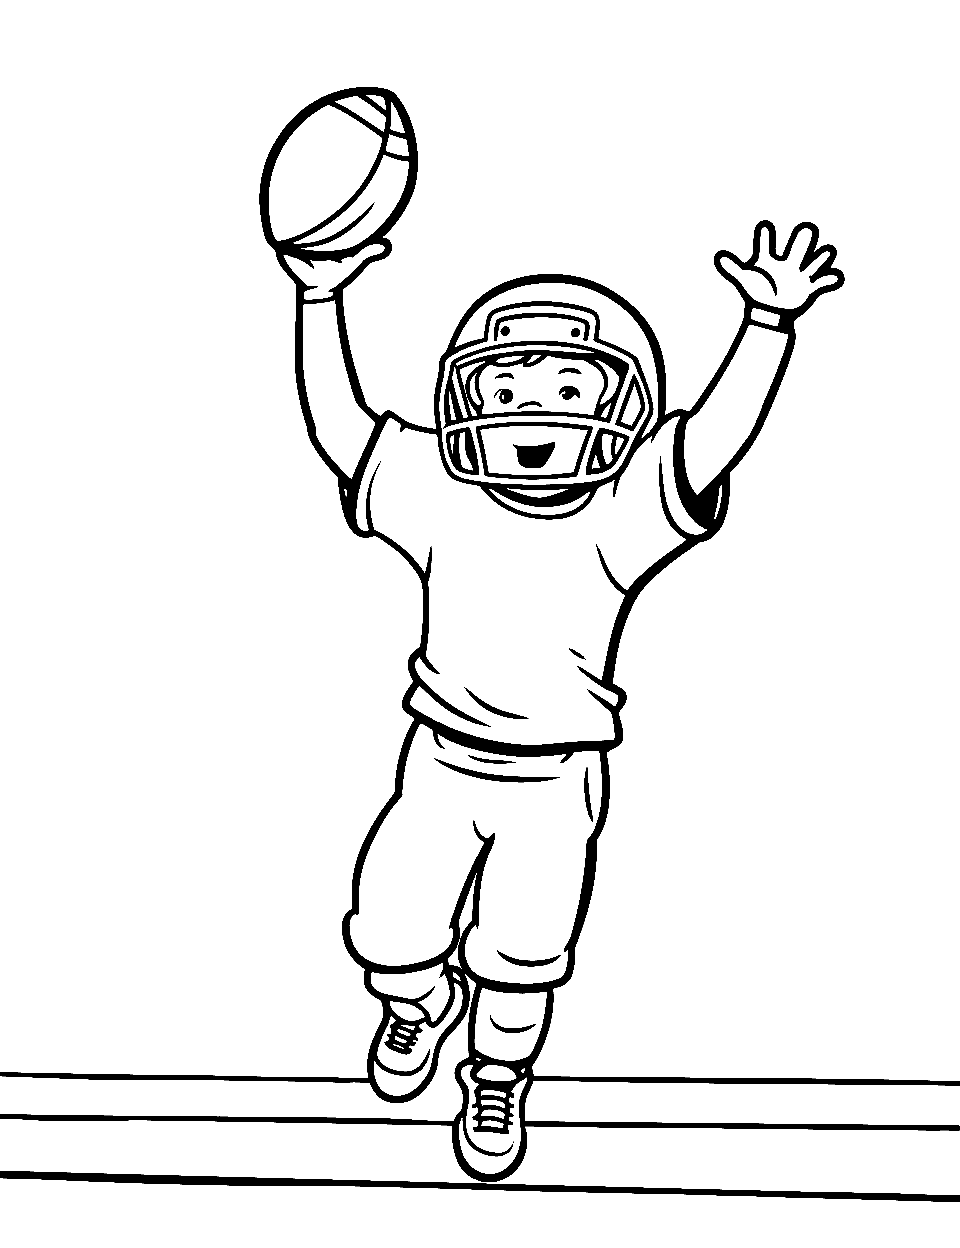 Exciting Touchdown Coloring Page - A player in the end zone raising a football triumphantly.